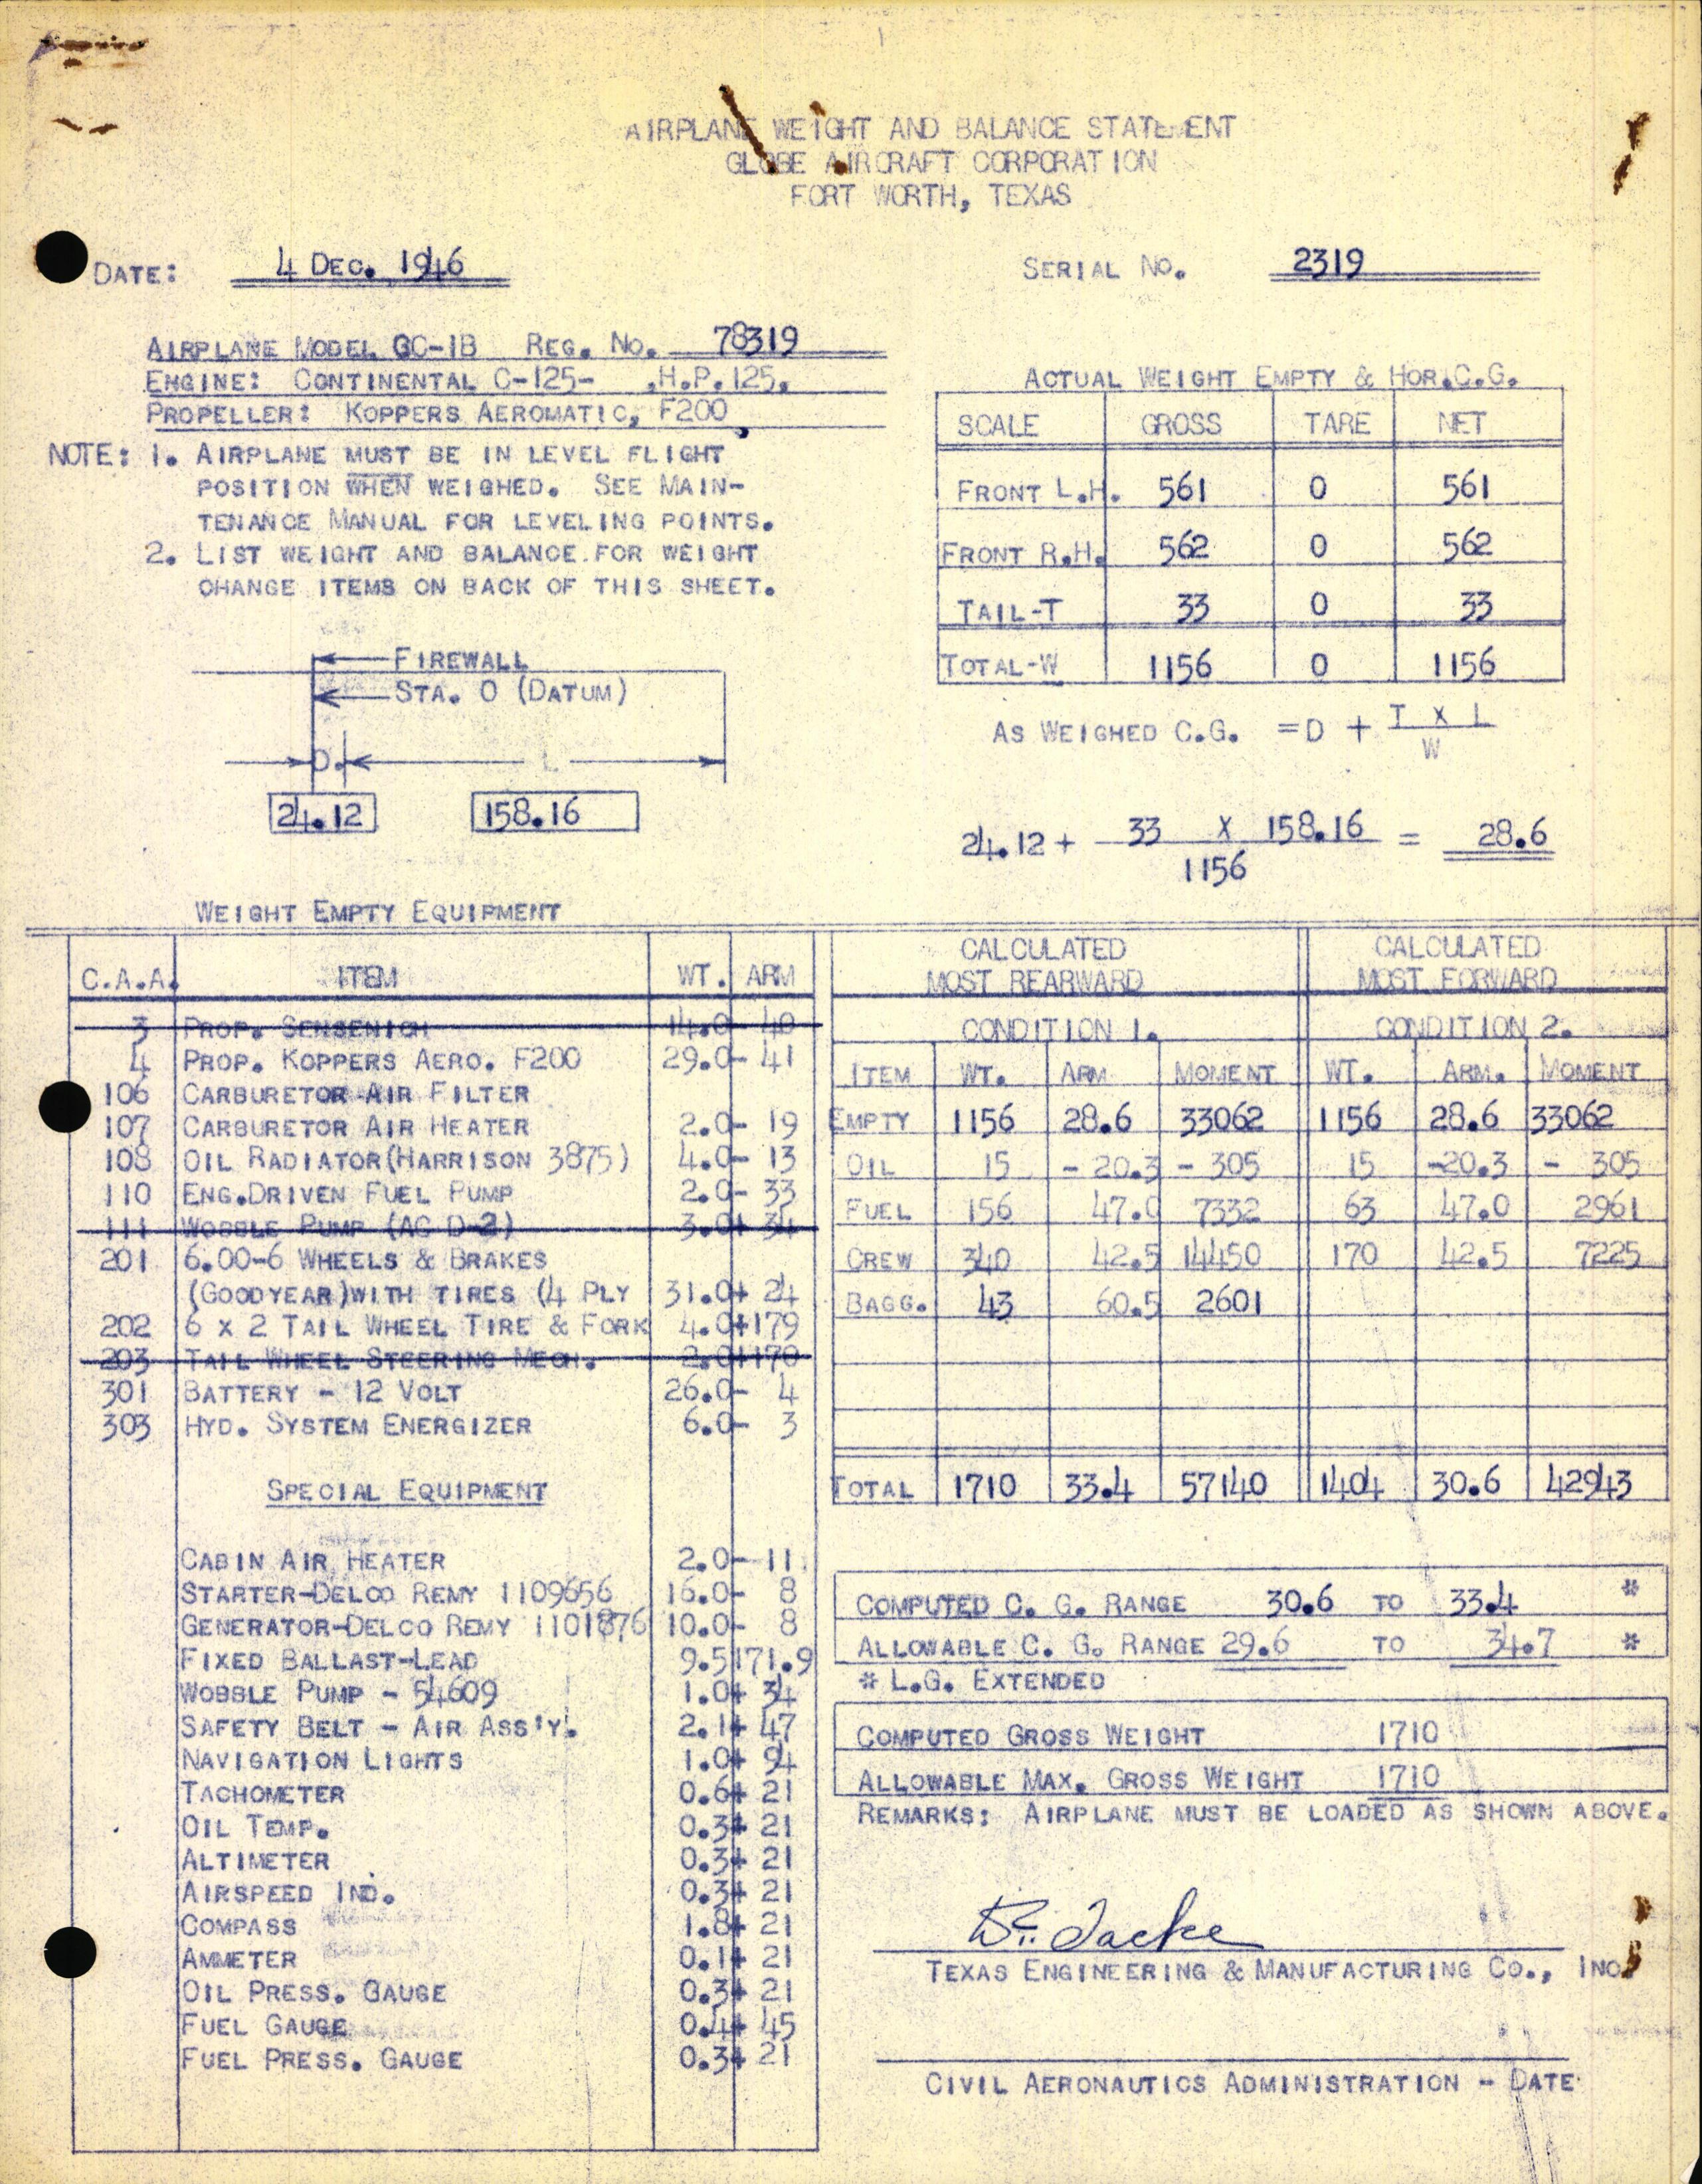 Sample page 1 from AirCorps Library document: Technical Information for Serial Number 2319